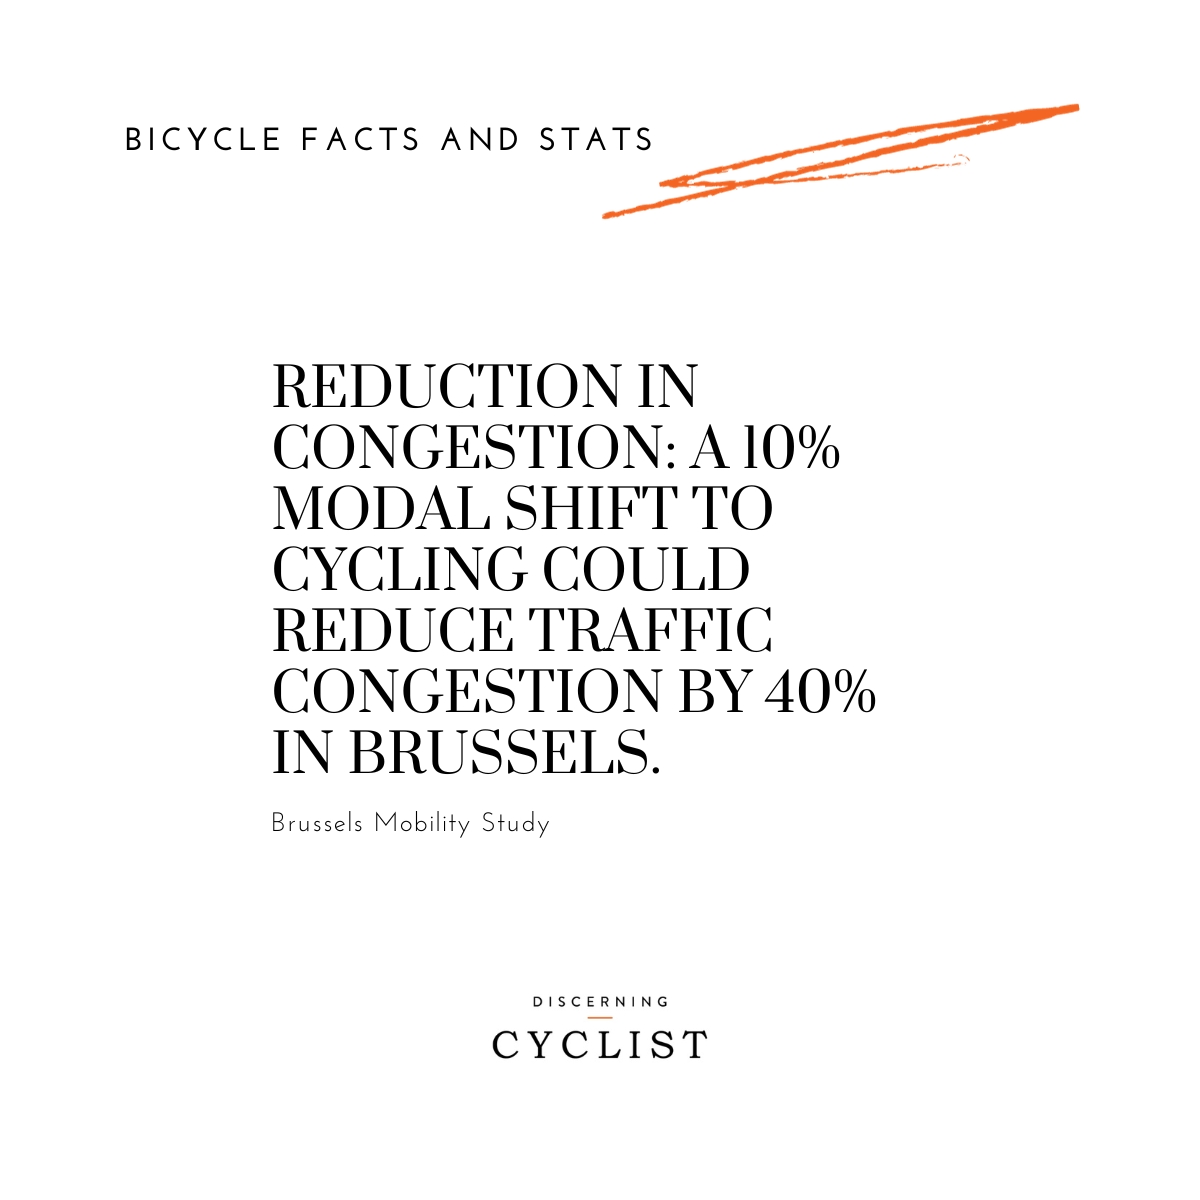 Reduction in Congestion: A 10% modal shift to cycling could reduce traffic congestion by 40% in Brussels.